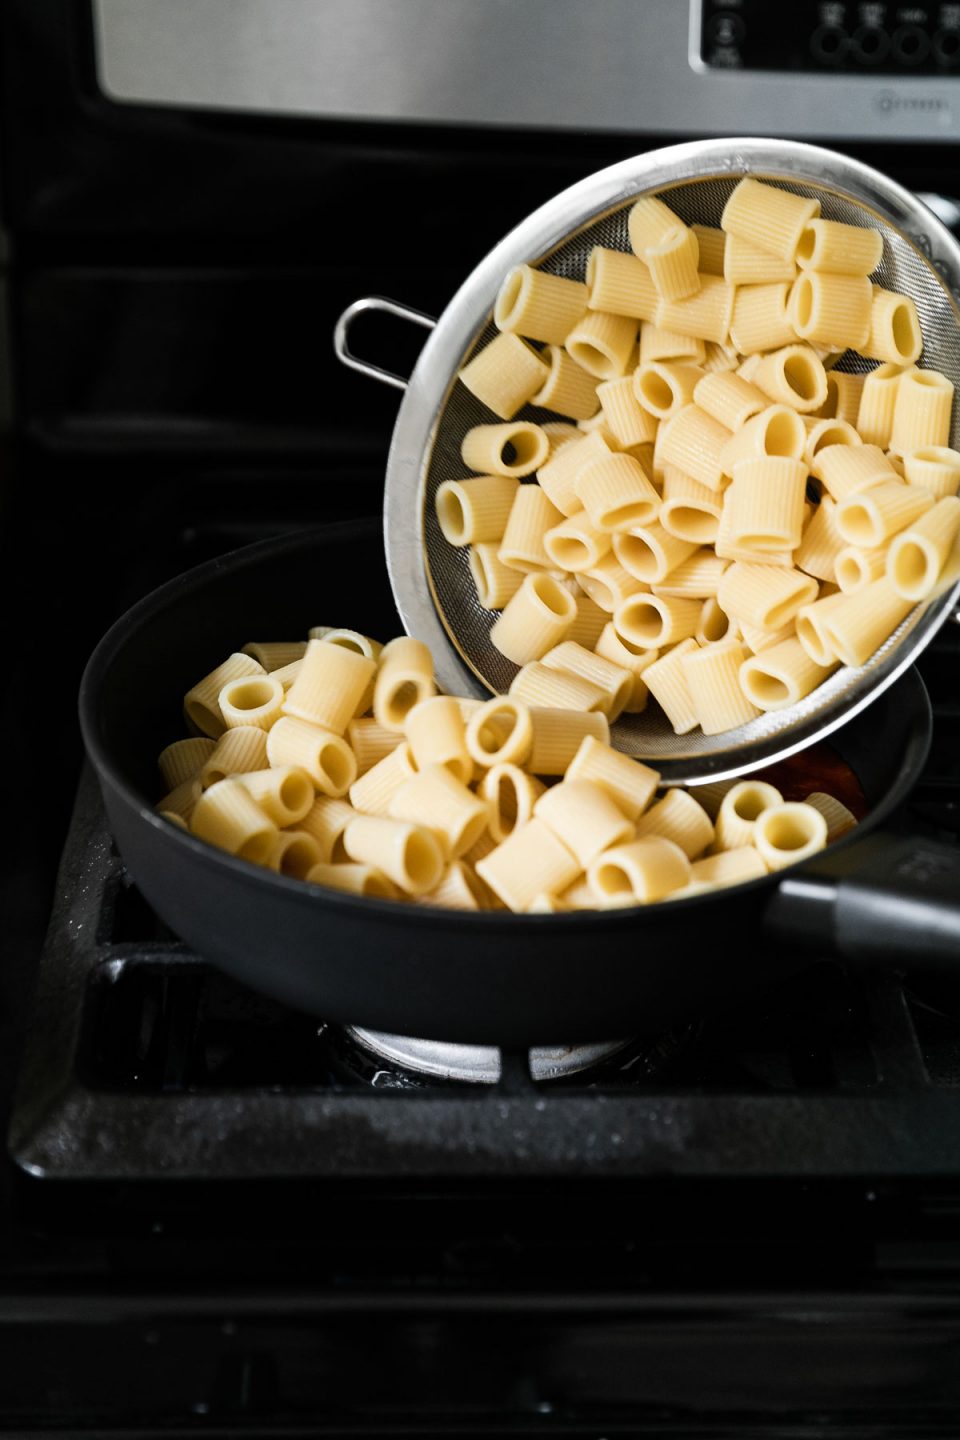 Al dente Mezzi Rigatoni pasta is added to a skillet filled with pasta sauce from a small mesh strainer. The skillet rests on a gas stovetop.